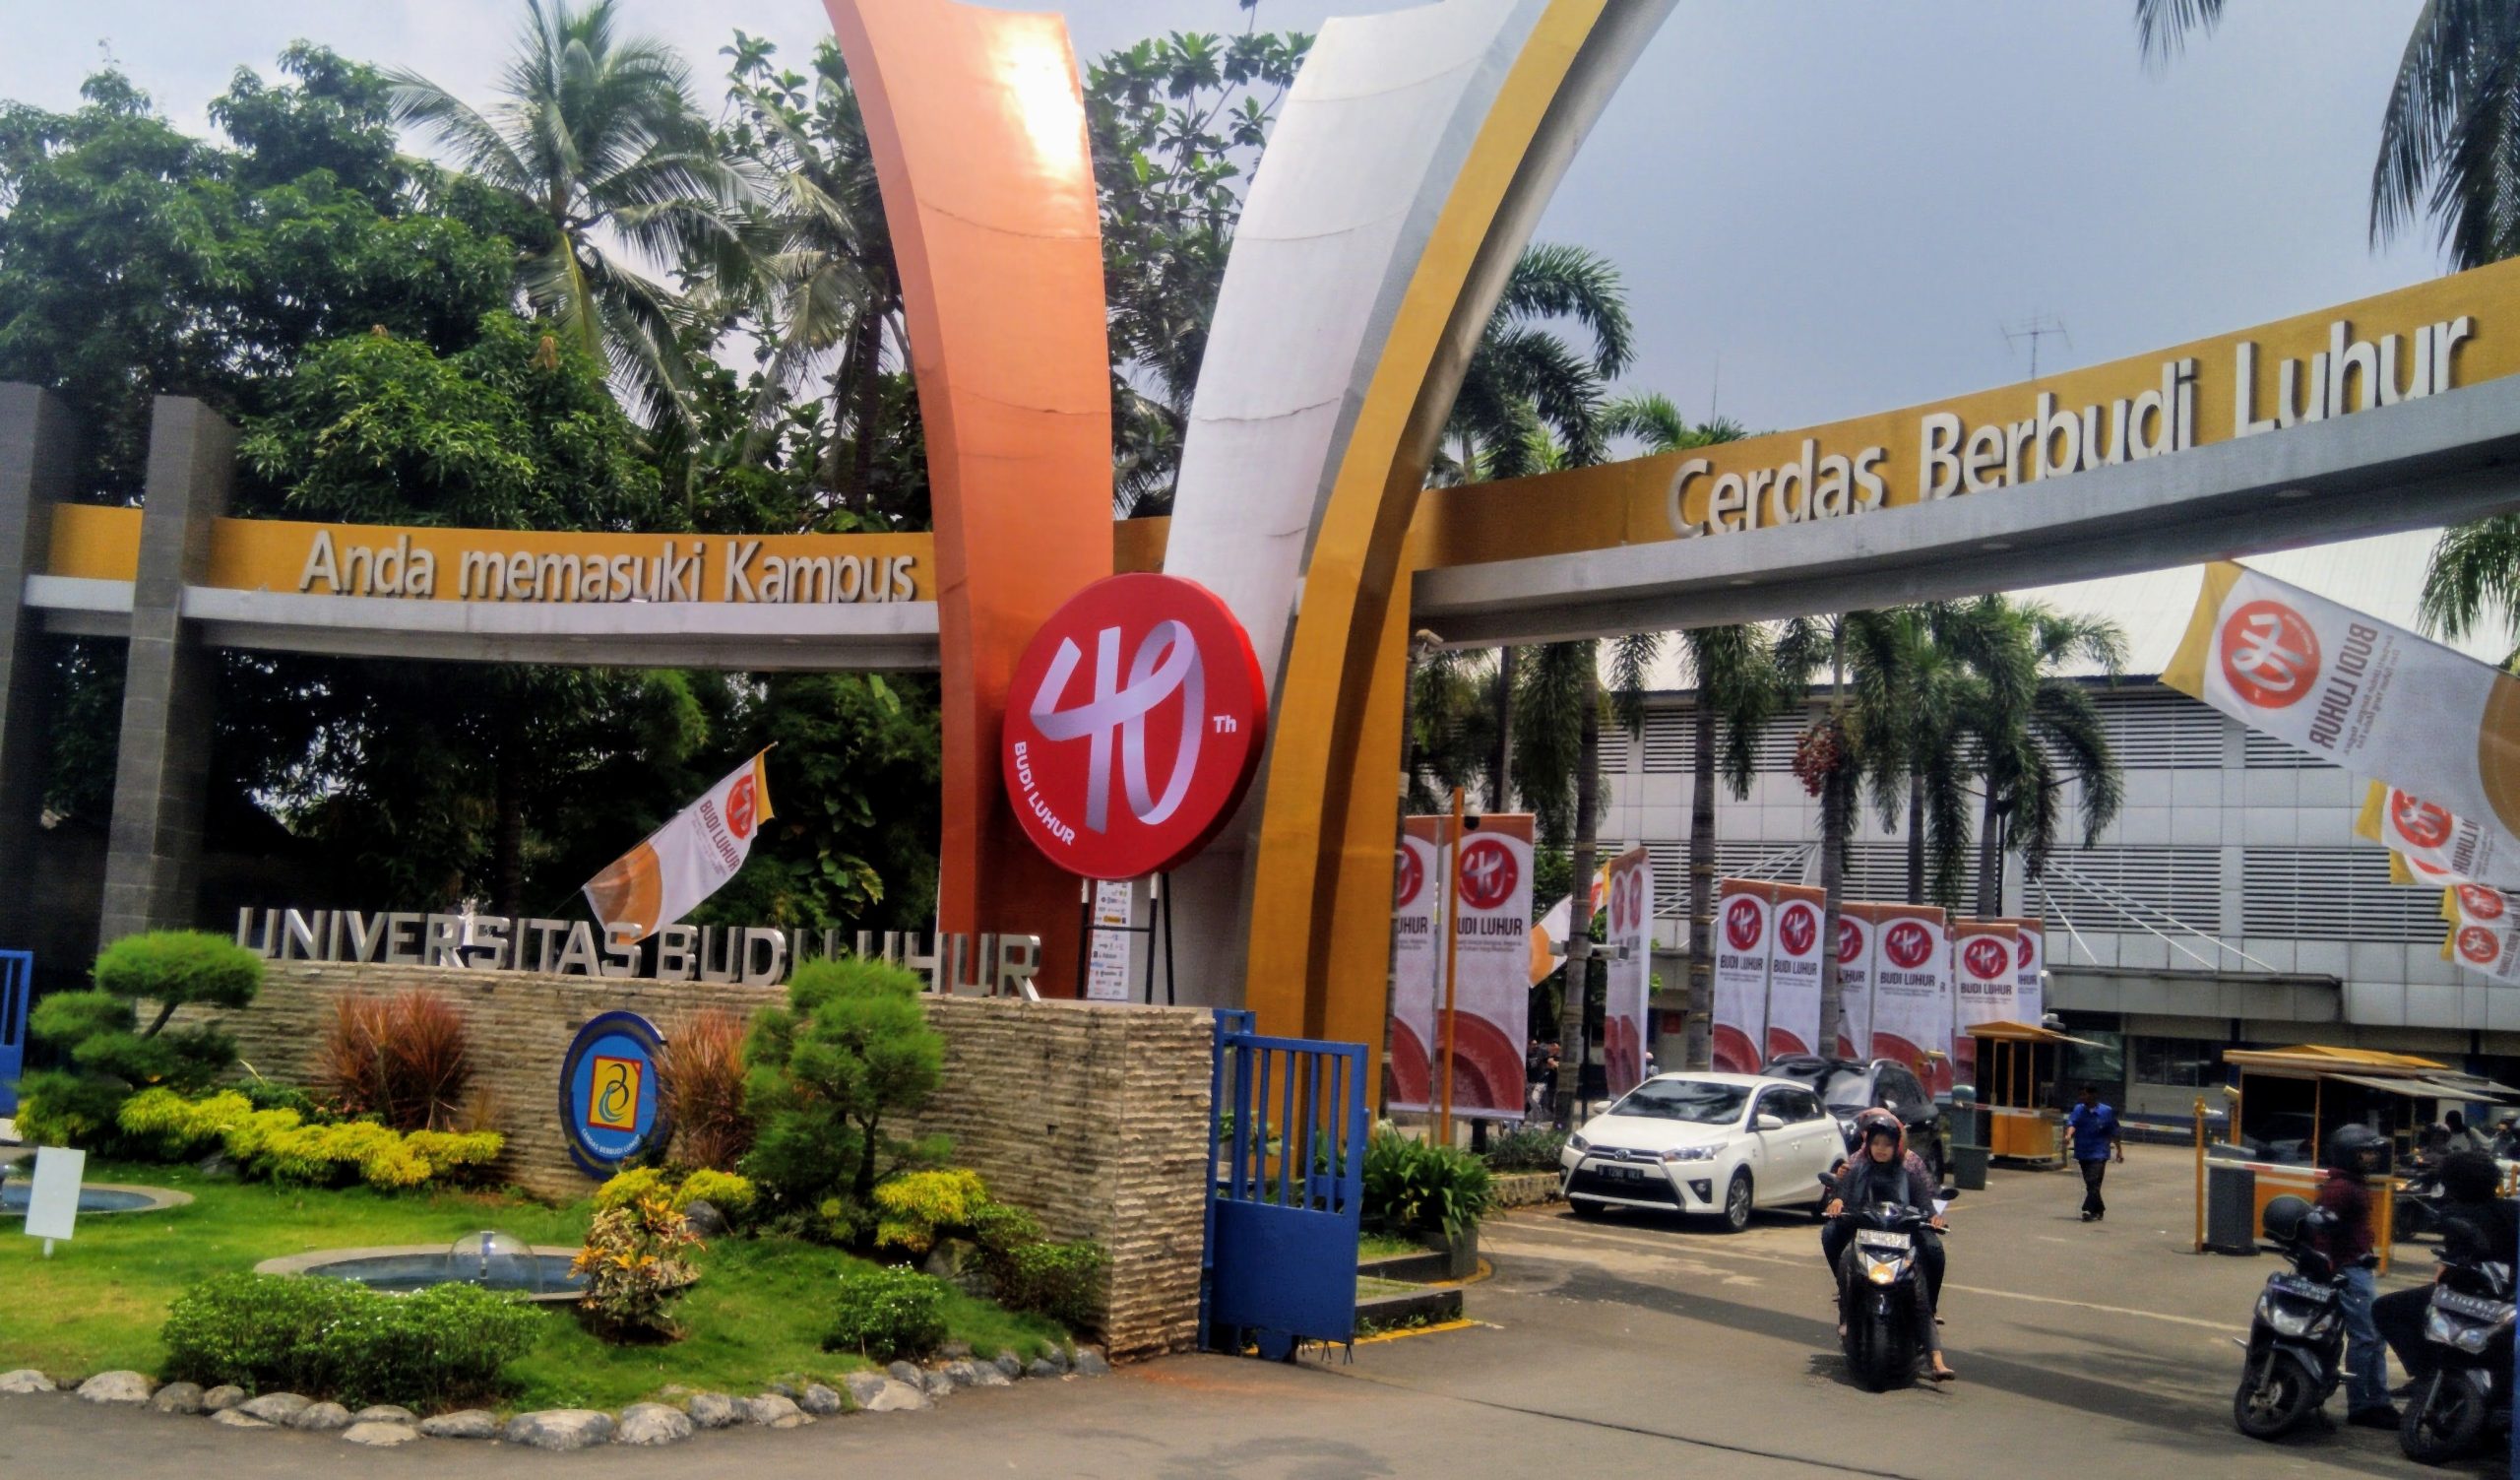 The front gate of Budi Luhur University, March 2019